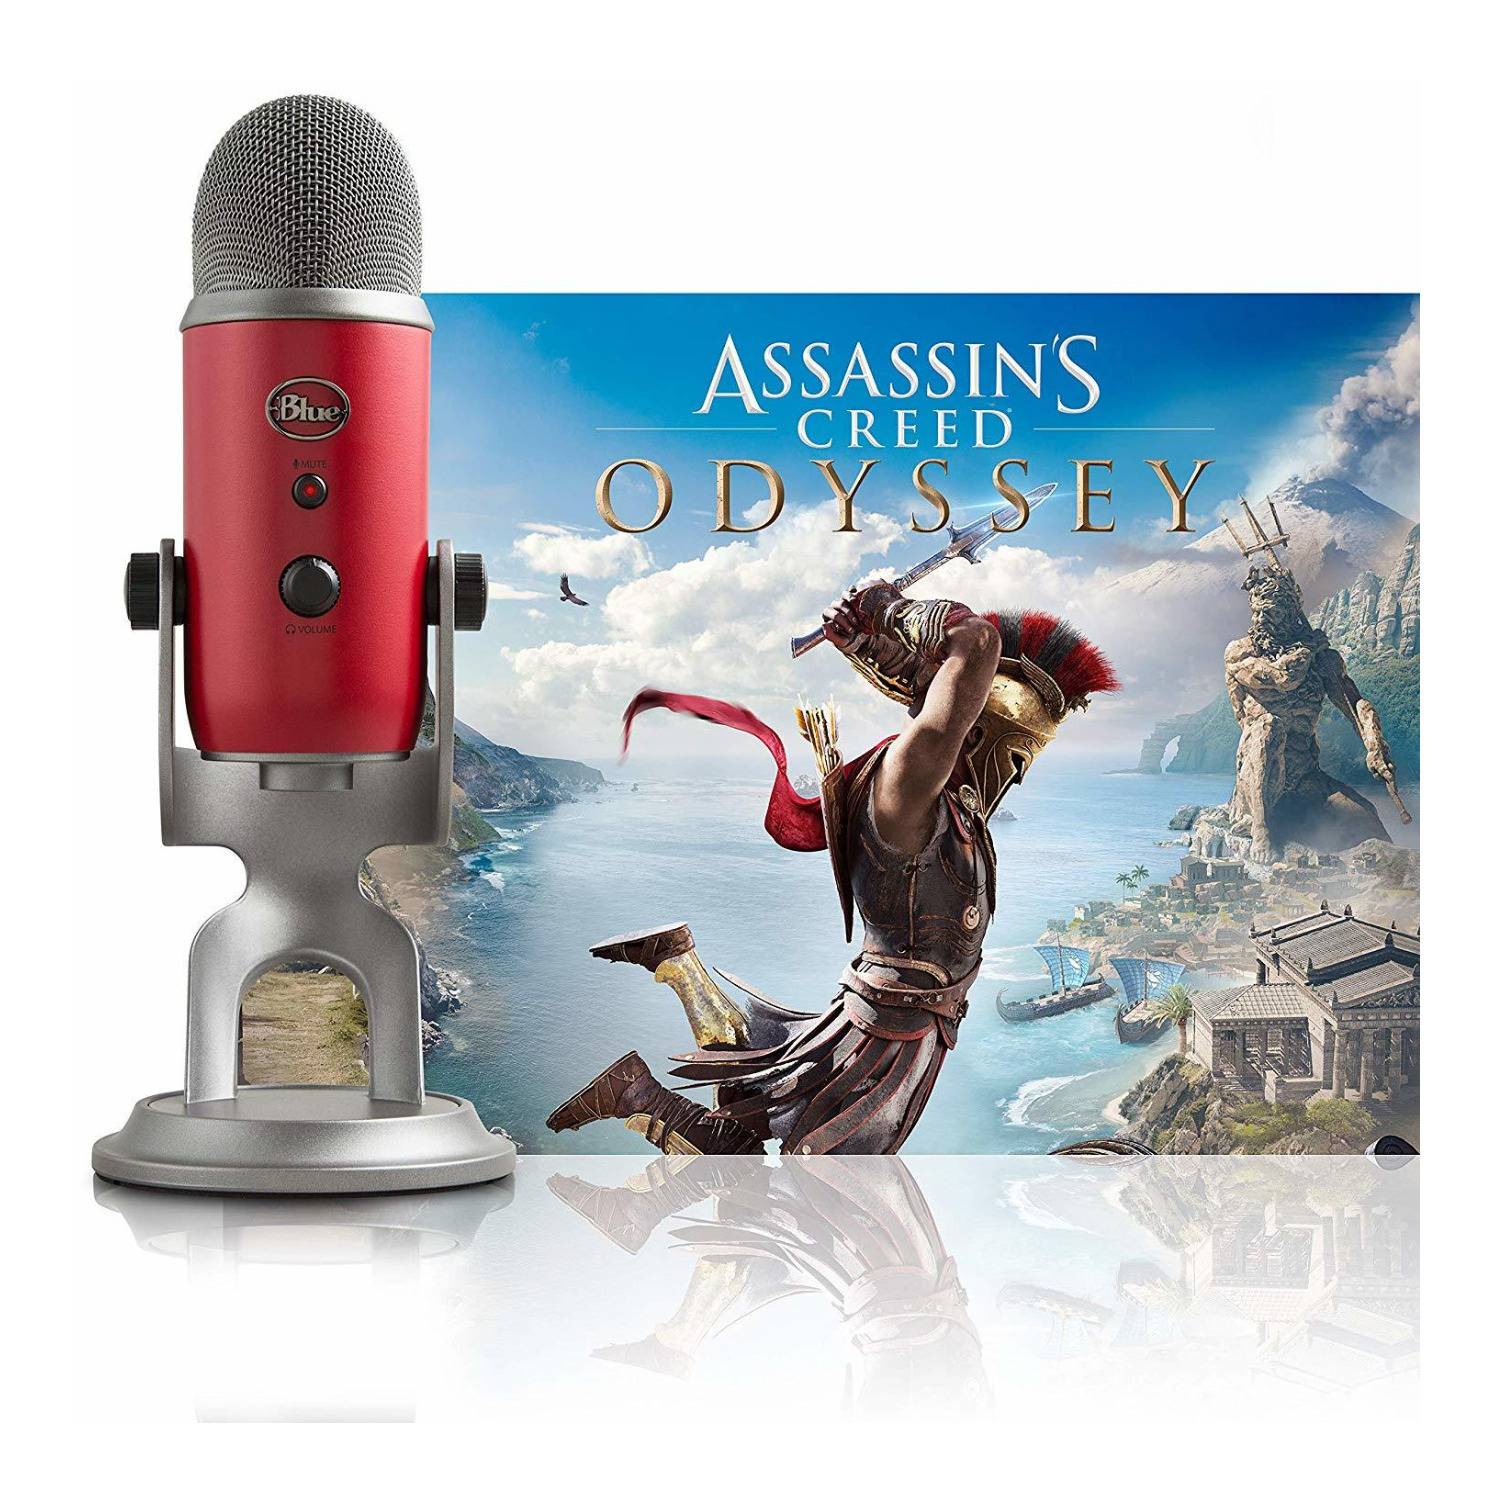 Blue Yeti USB Microphone (Red) and Assassin's Creed Odyssey Streamer with Assassins Creed Game Card